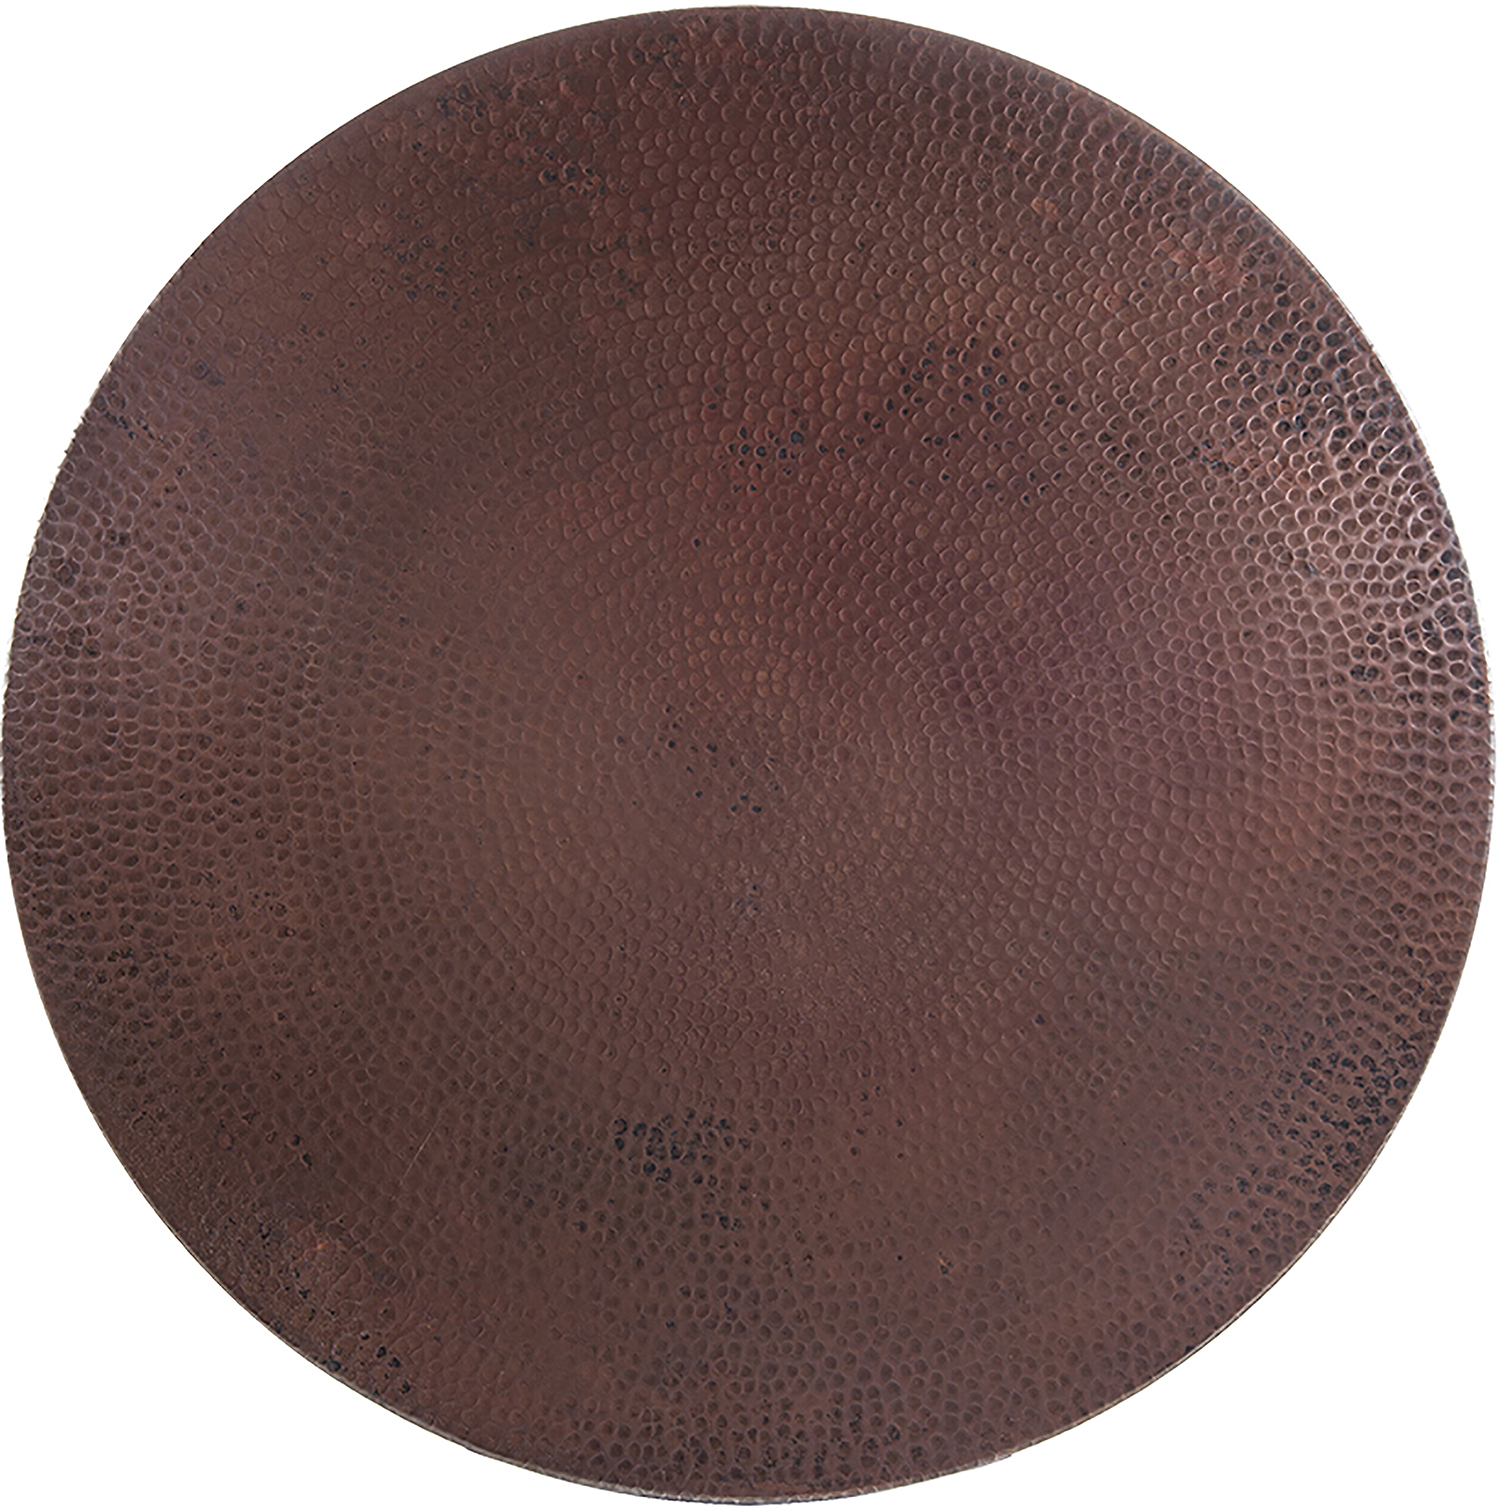 24" Rd. Hammered Copper Top